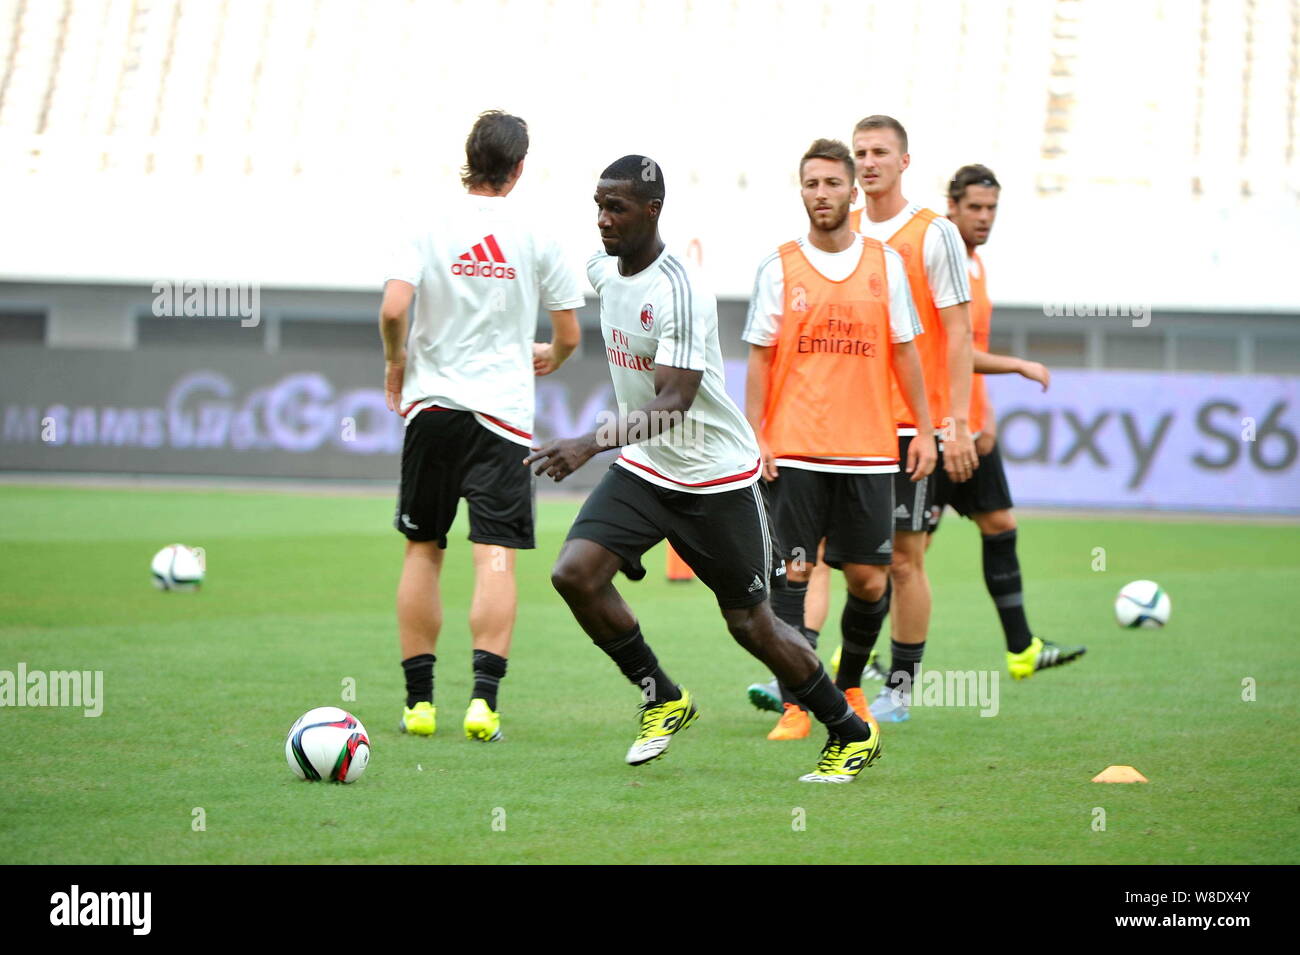 Cristian Eduardo Zapata Valencia, front, and teammates of AC Milan take part in a training session in Shanghai, China, 29 July 2015. Stock Photo